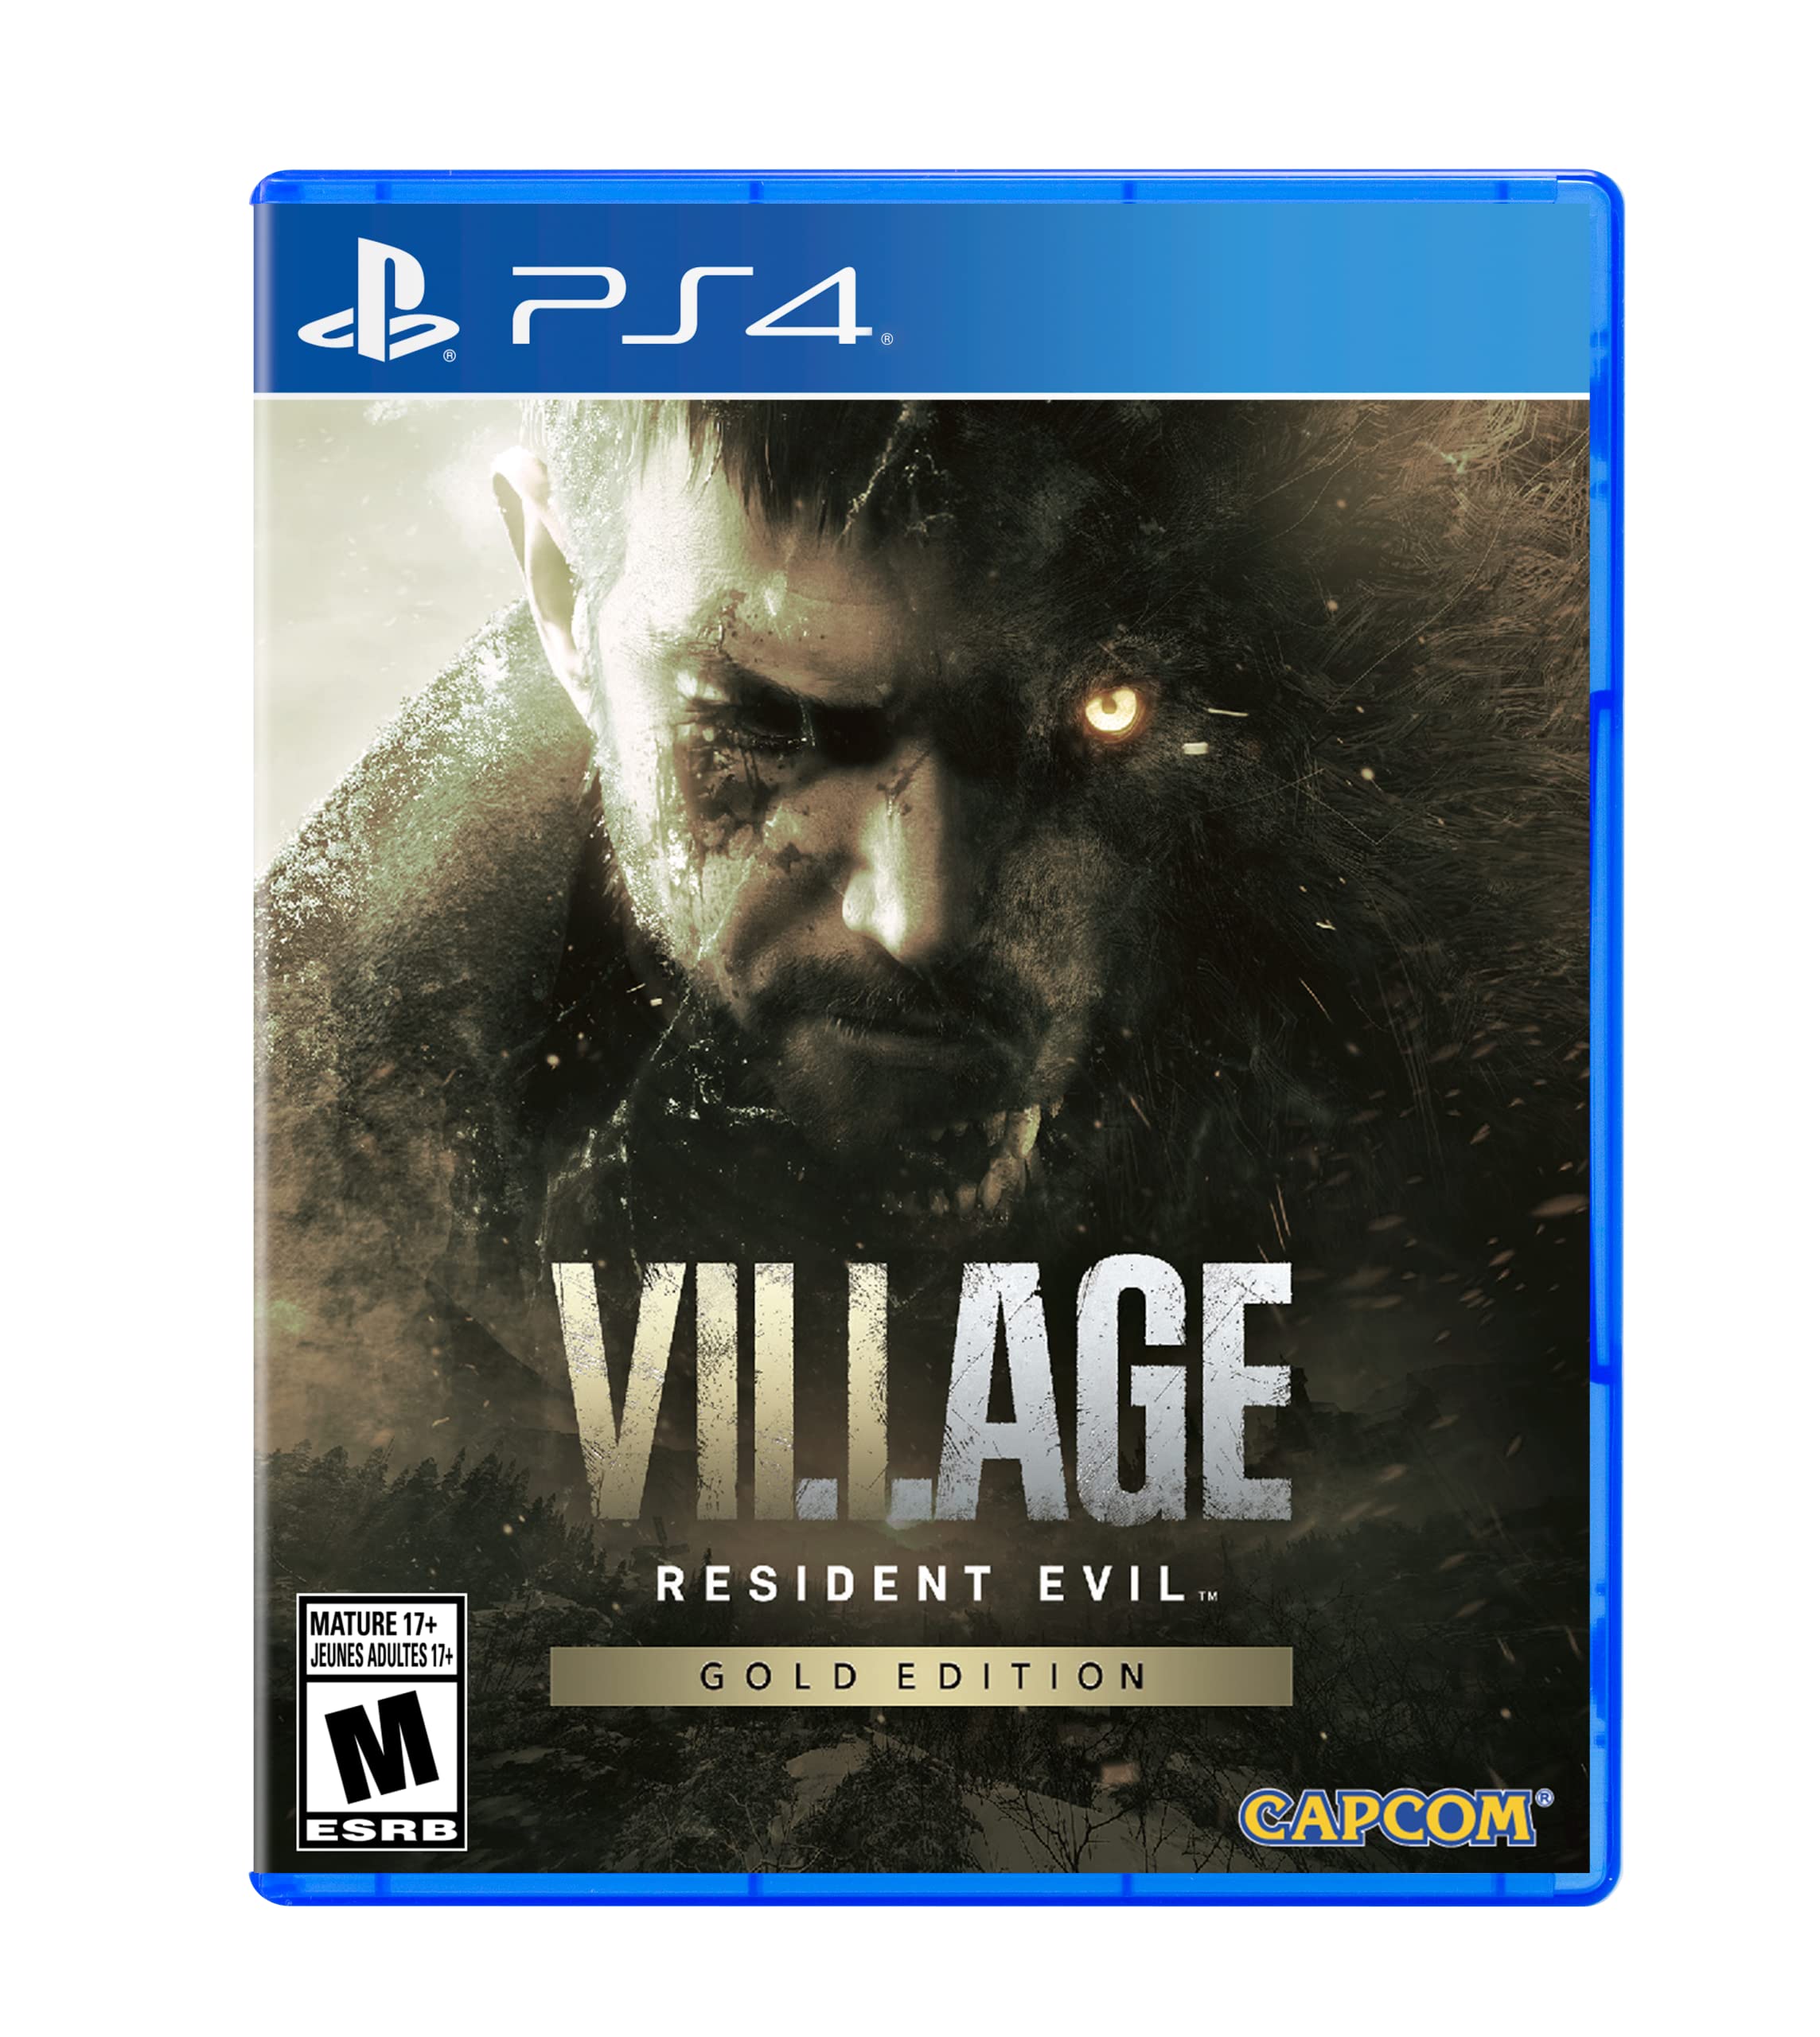 Resident Evil: Village - Gold Edition (PS4) (GameReplay)